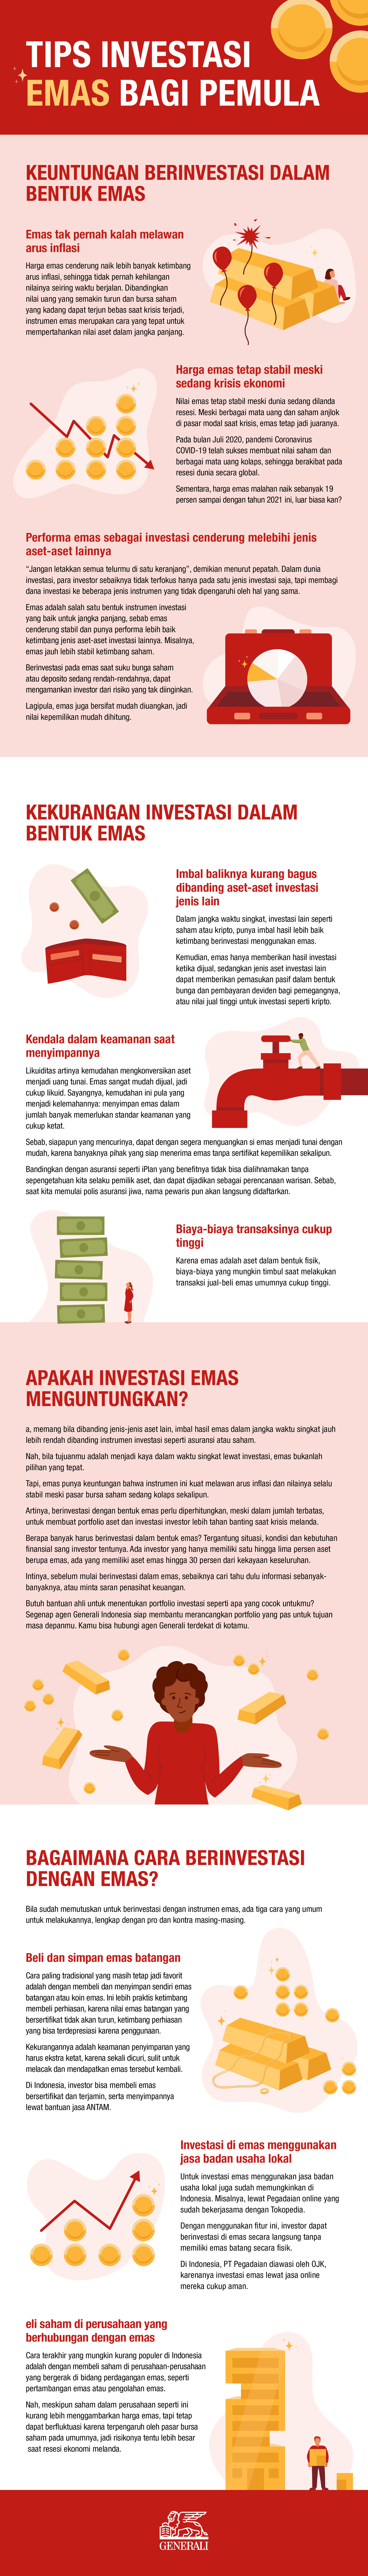 Generali_Indonesia_Is gold a good investment_02.19.21.png